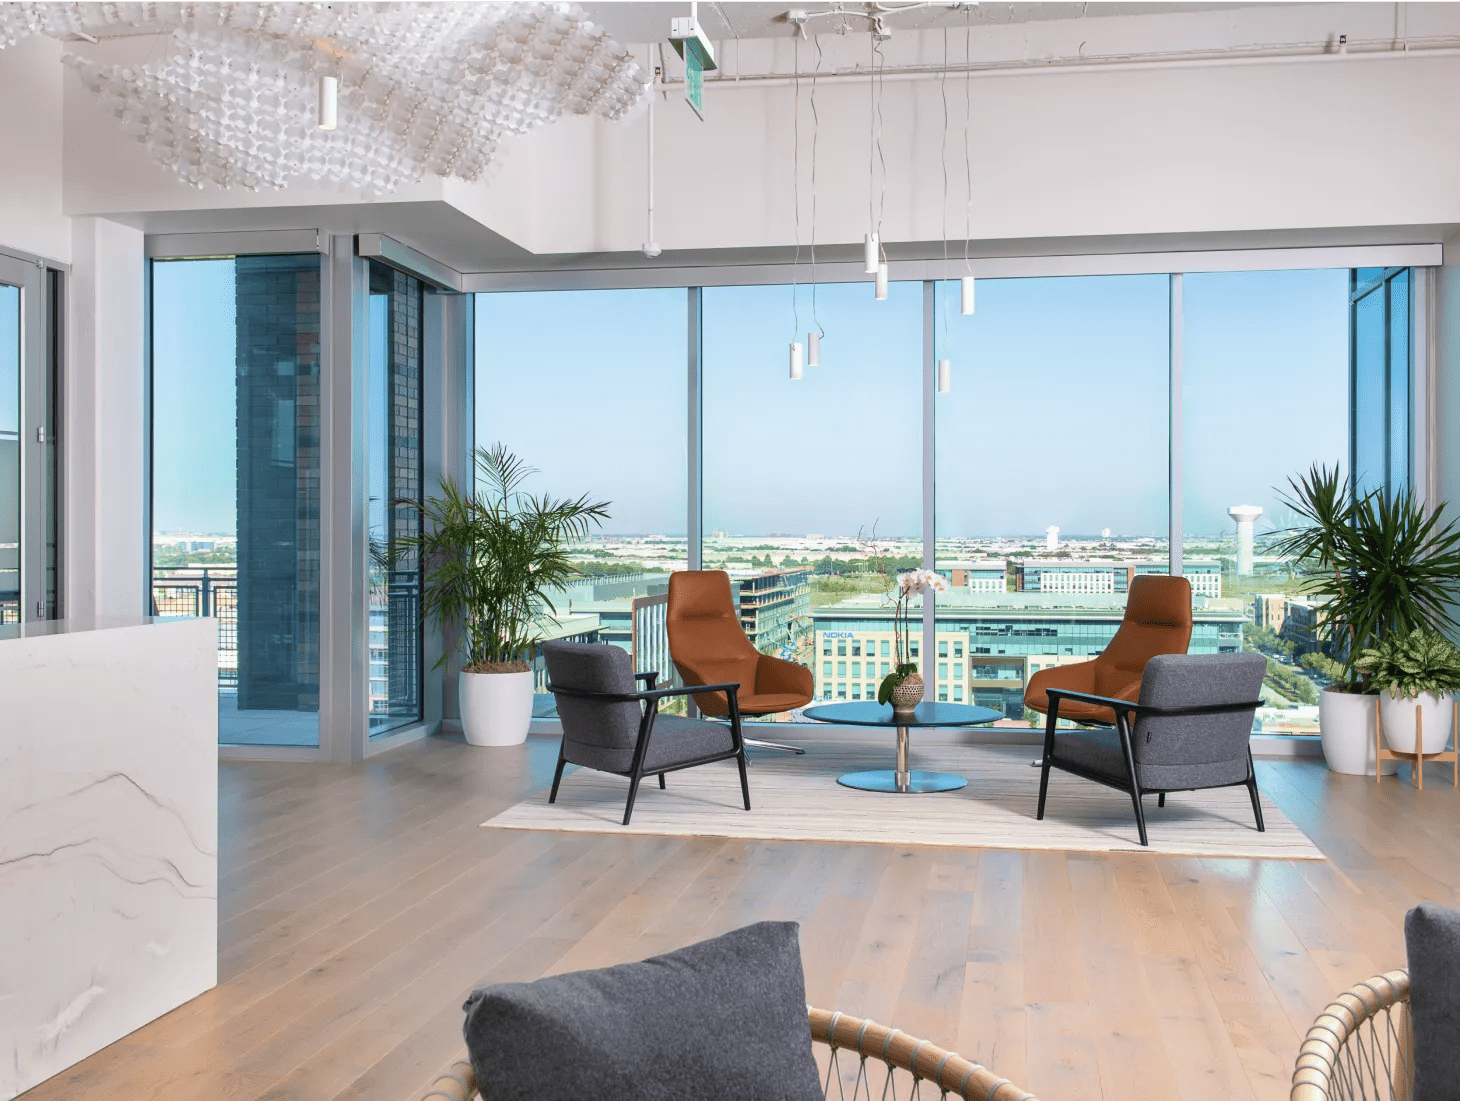 Interior of the Verily Dallas office looking out at the city skyline